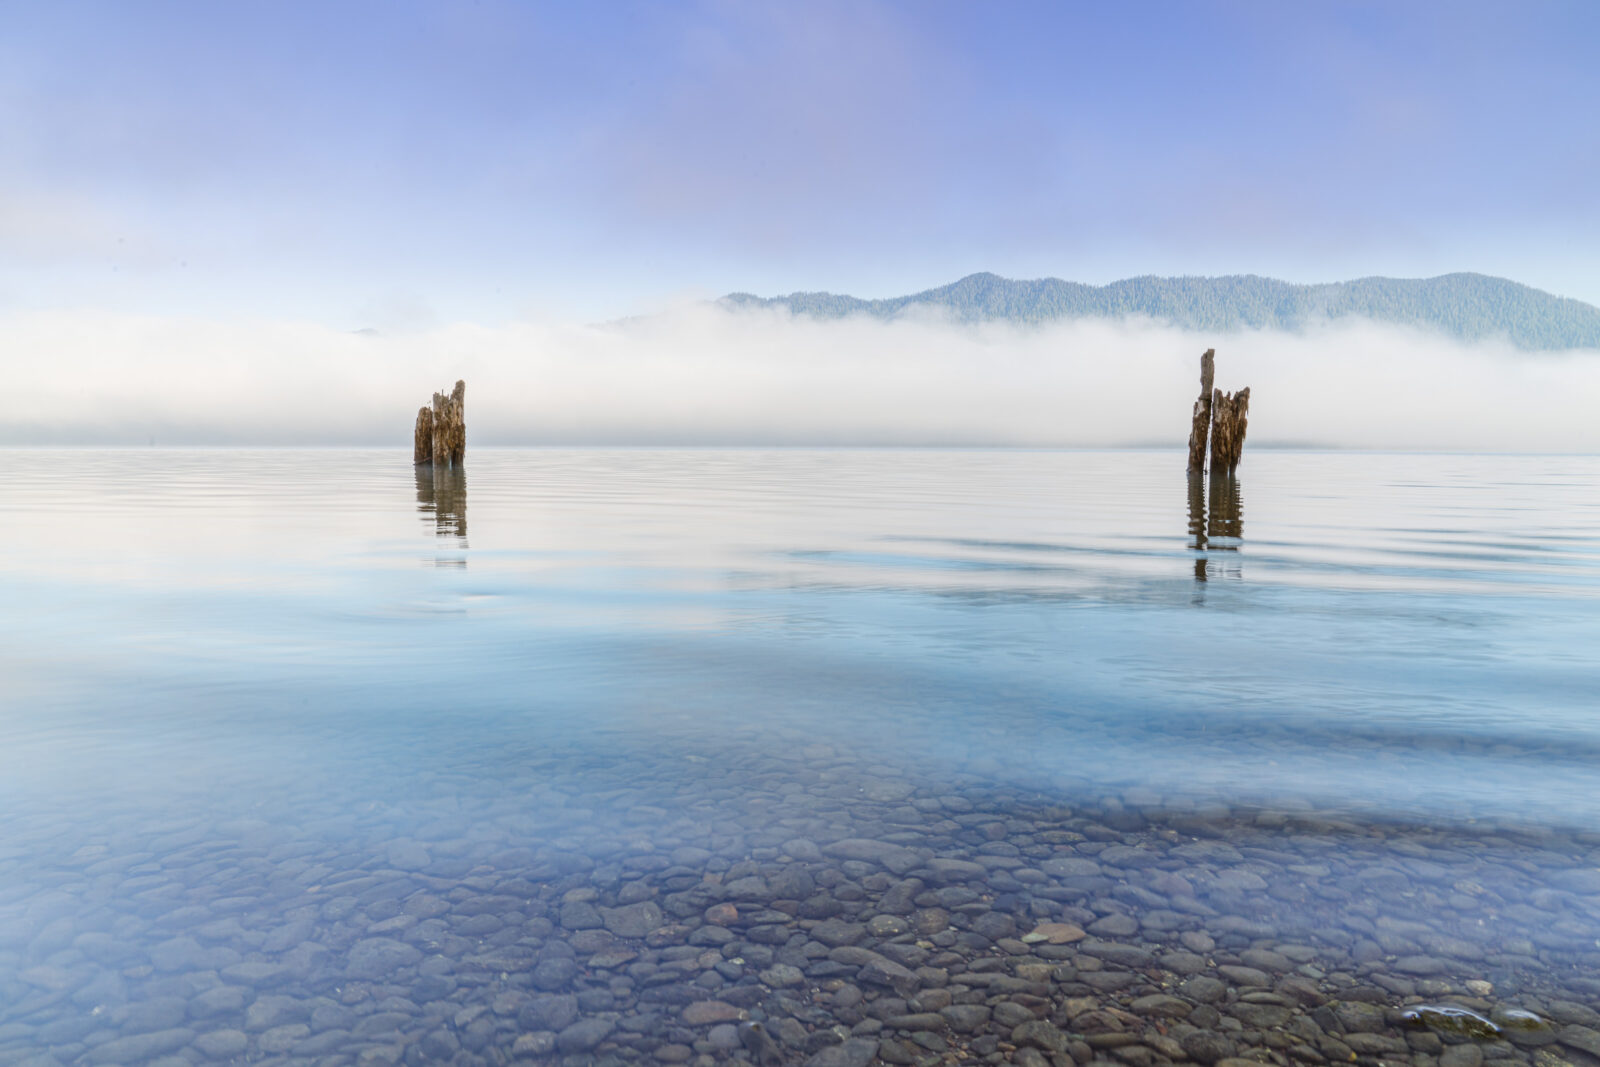 Lake Quinault at sunrise in Olympic National Park